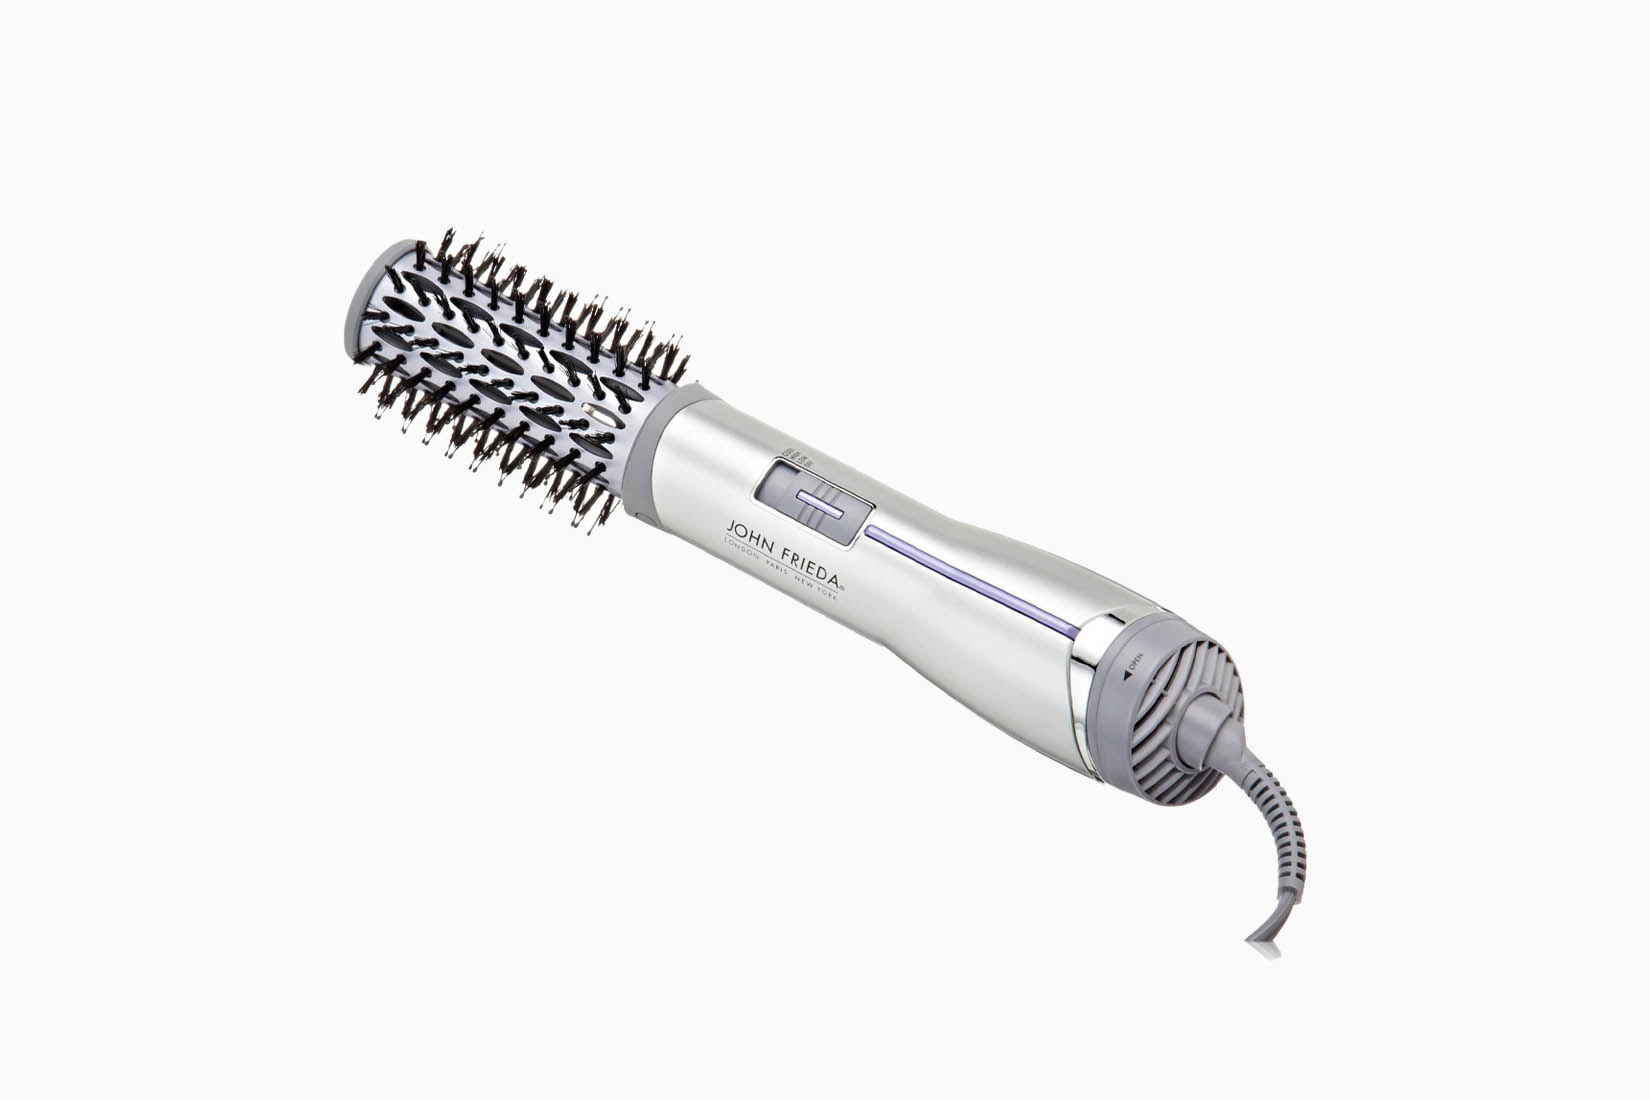 13 Best Hair Dryer Brushes For Fast Blowout & Styling (2021)